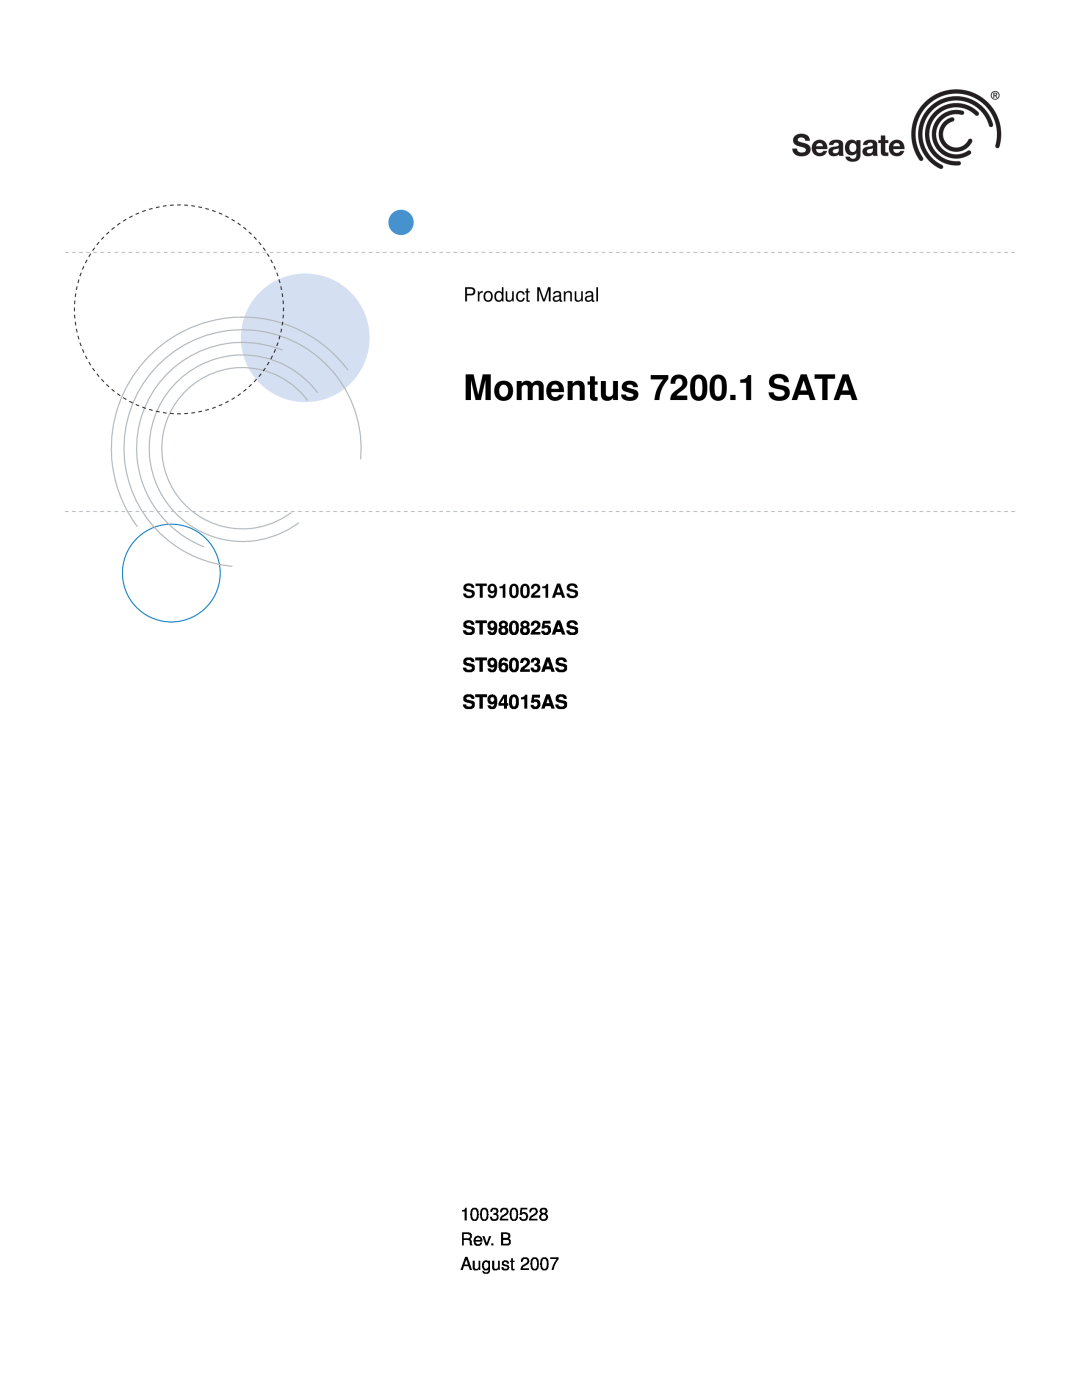 Seagate manual ST910021AS ST980825AS ST96023AS ST94015AS, Momentus 7200.1 SATA, Product Manual 